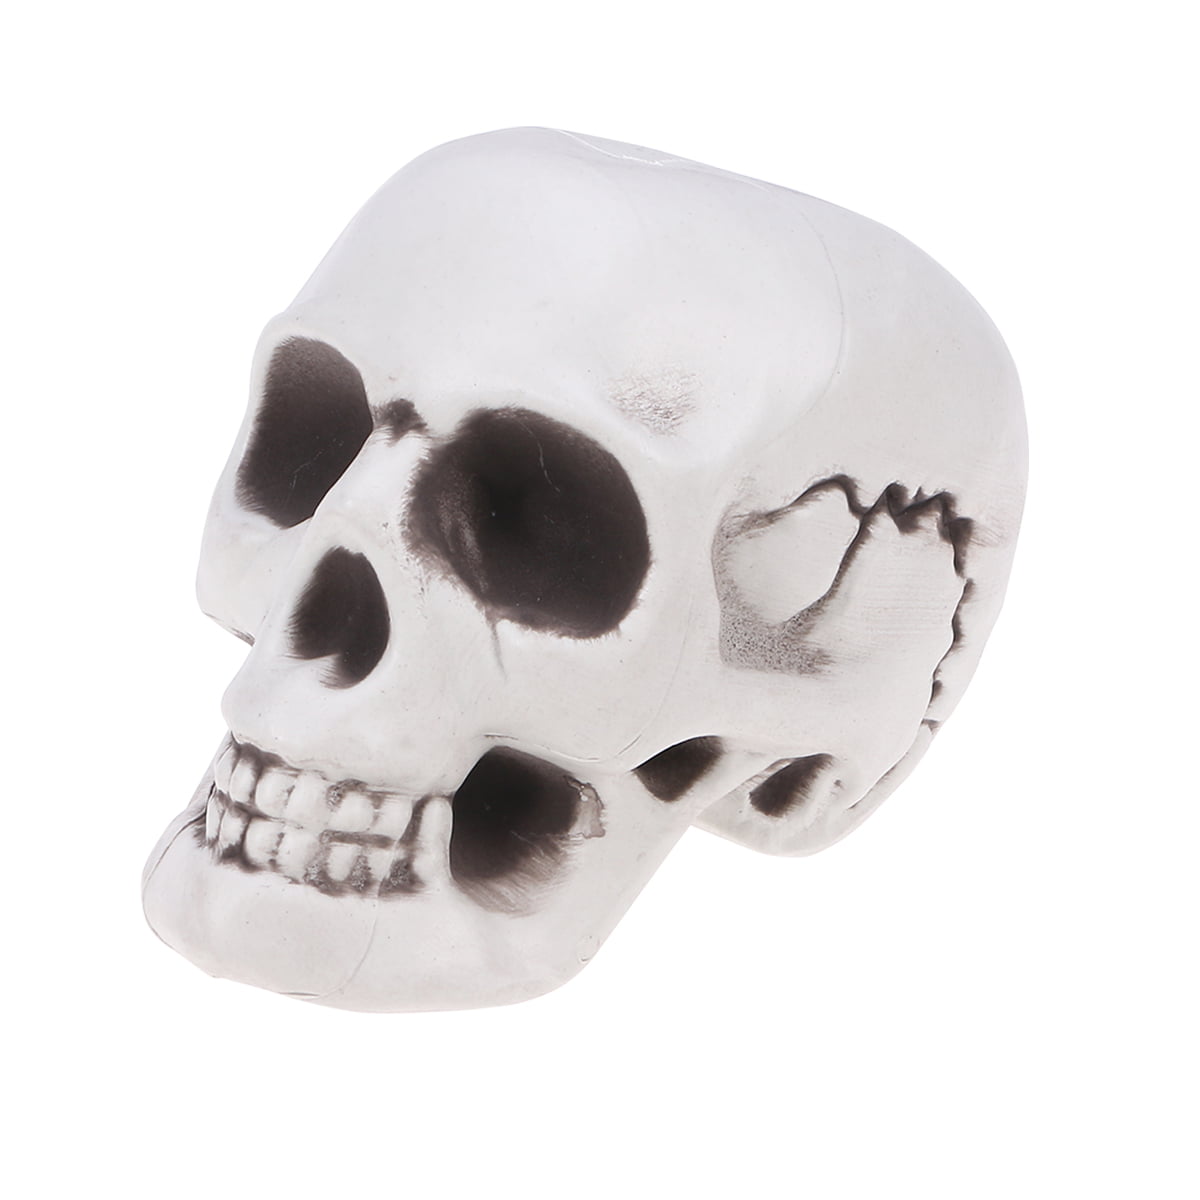 Details about   Set of 8 Small Miniature Skull Head Halloween Plastic New! 